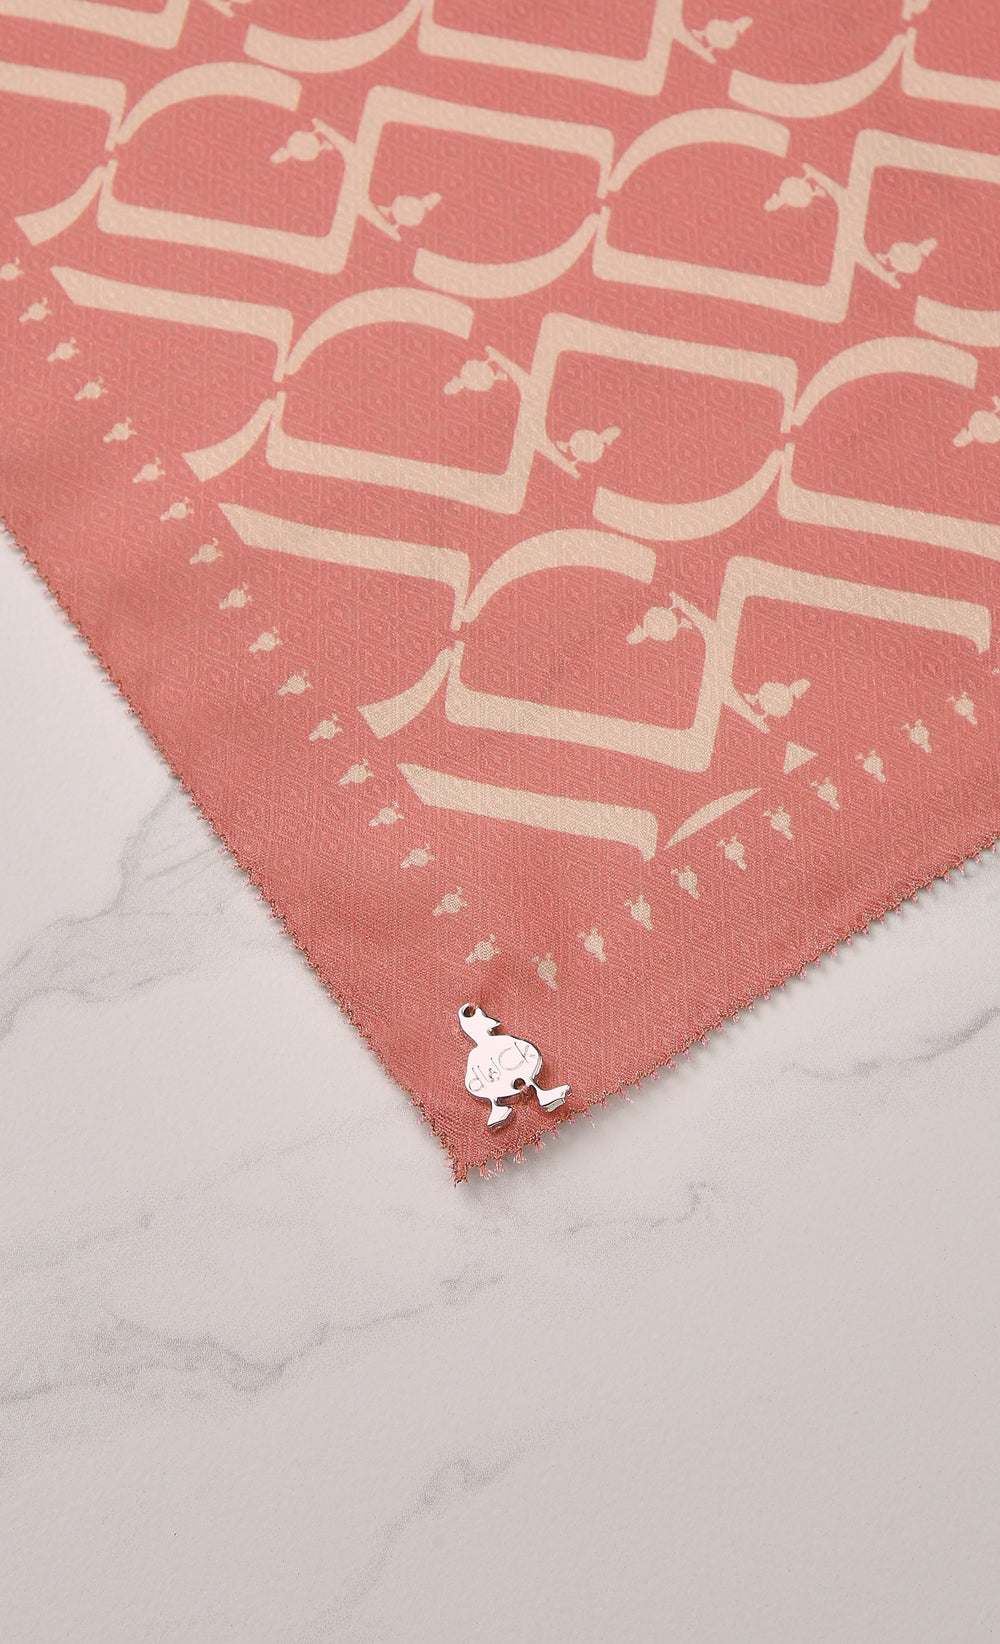 D Monogram dUCk Voile Square Scarf in Creamsicle